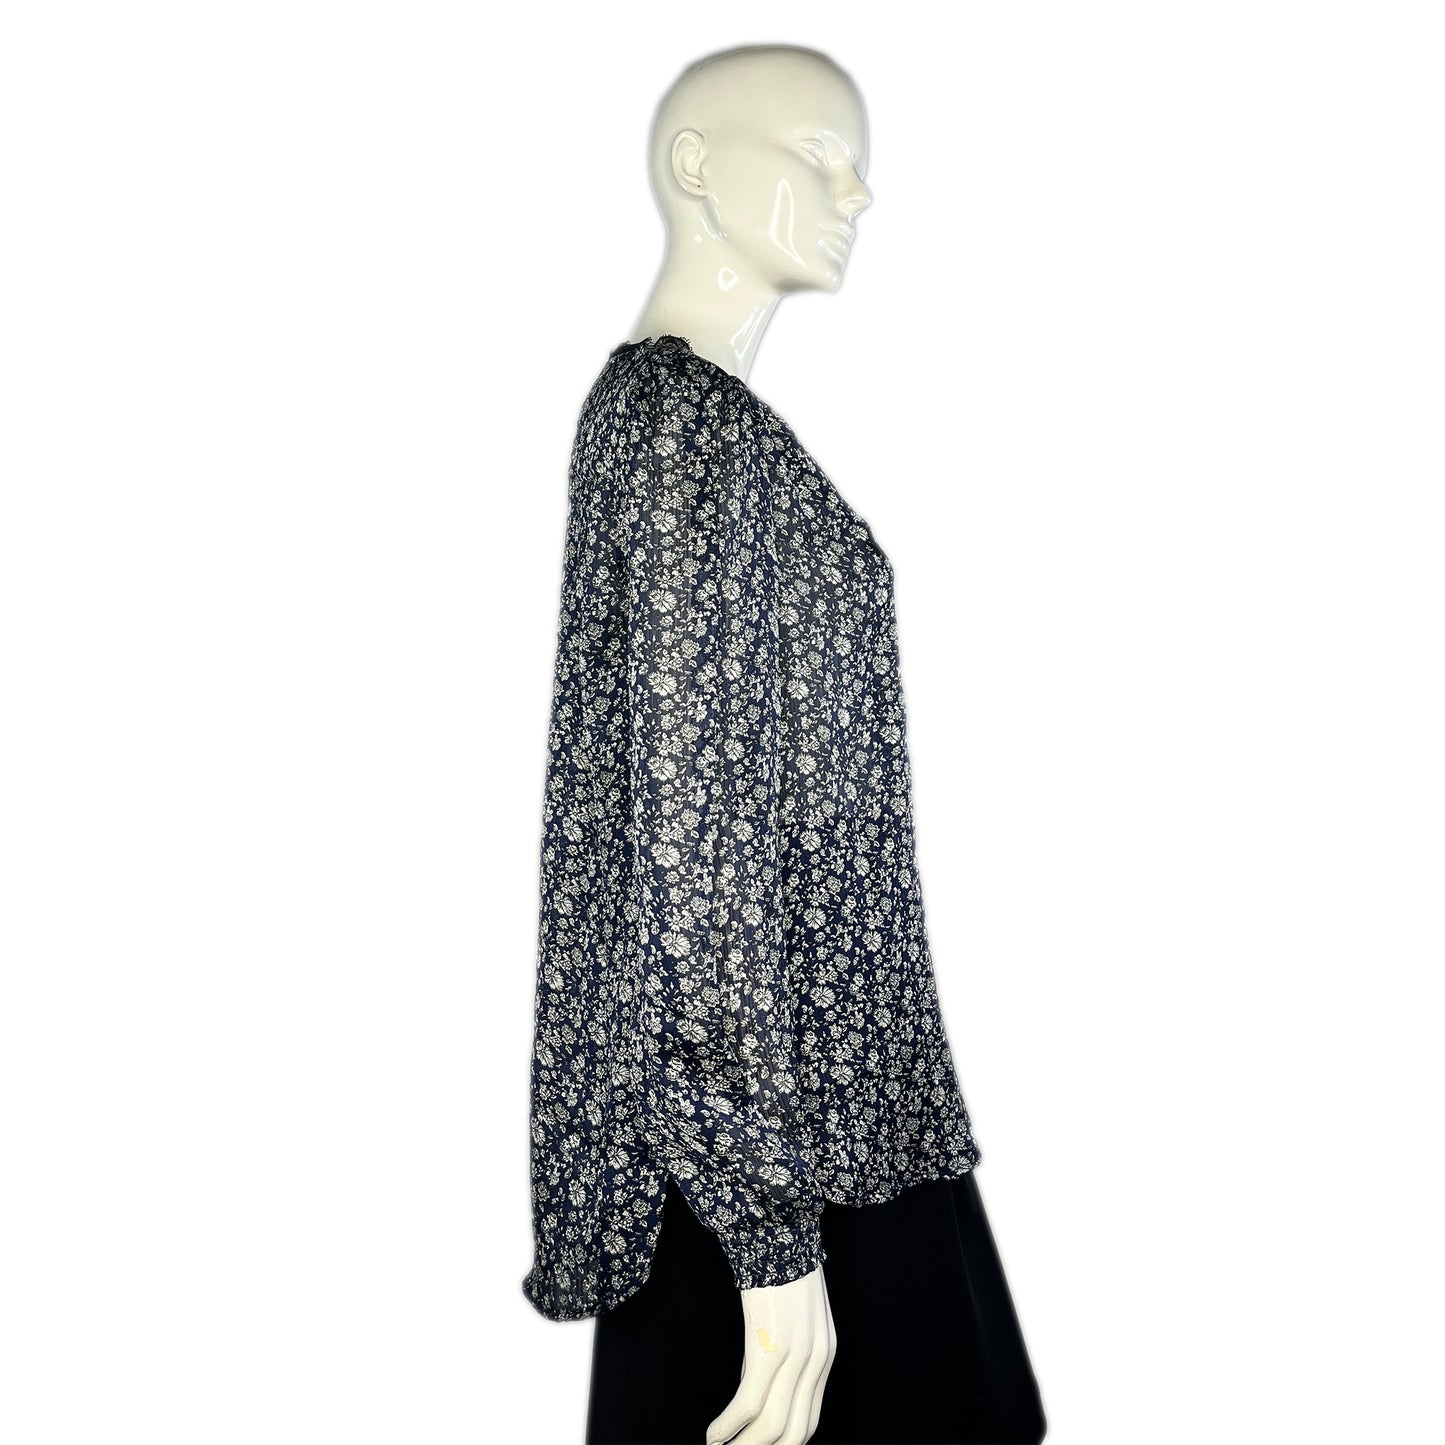 Lucky Brand Top Long Sleeve Sheer Floral Lace Detail Blue, White, Black Size M SKU 000267-4